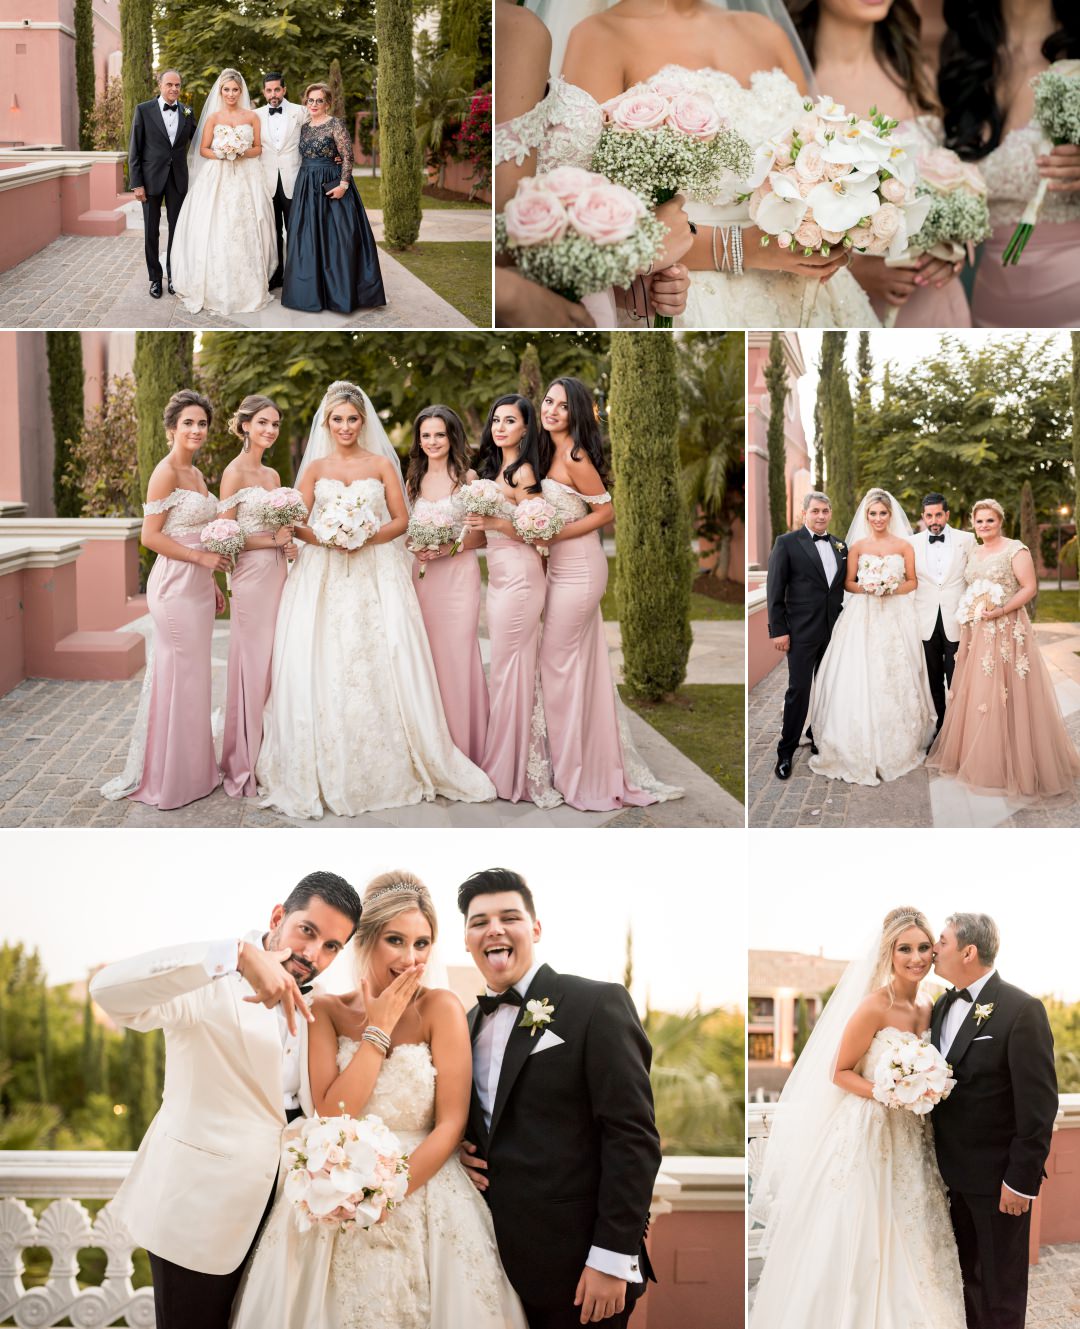 Bridesmaids and family portraits